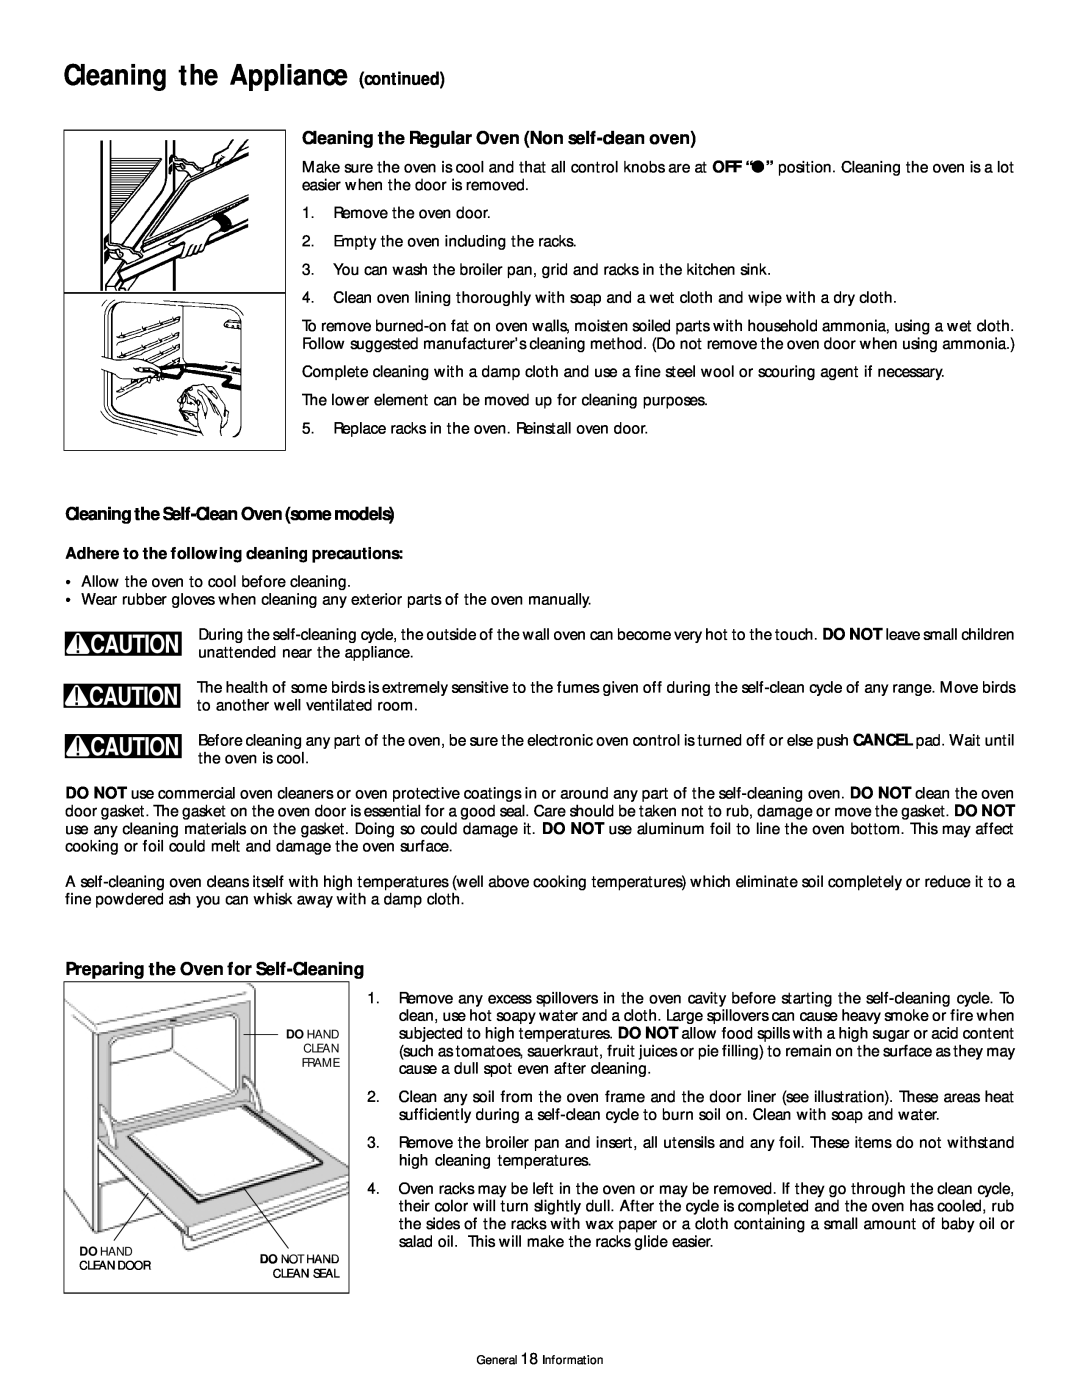 Frigidaire 318200407 manual Cleaning the Regular Oven Non self-clean oven, Cleaning the Self-Clean Oven some models 